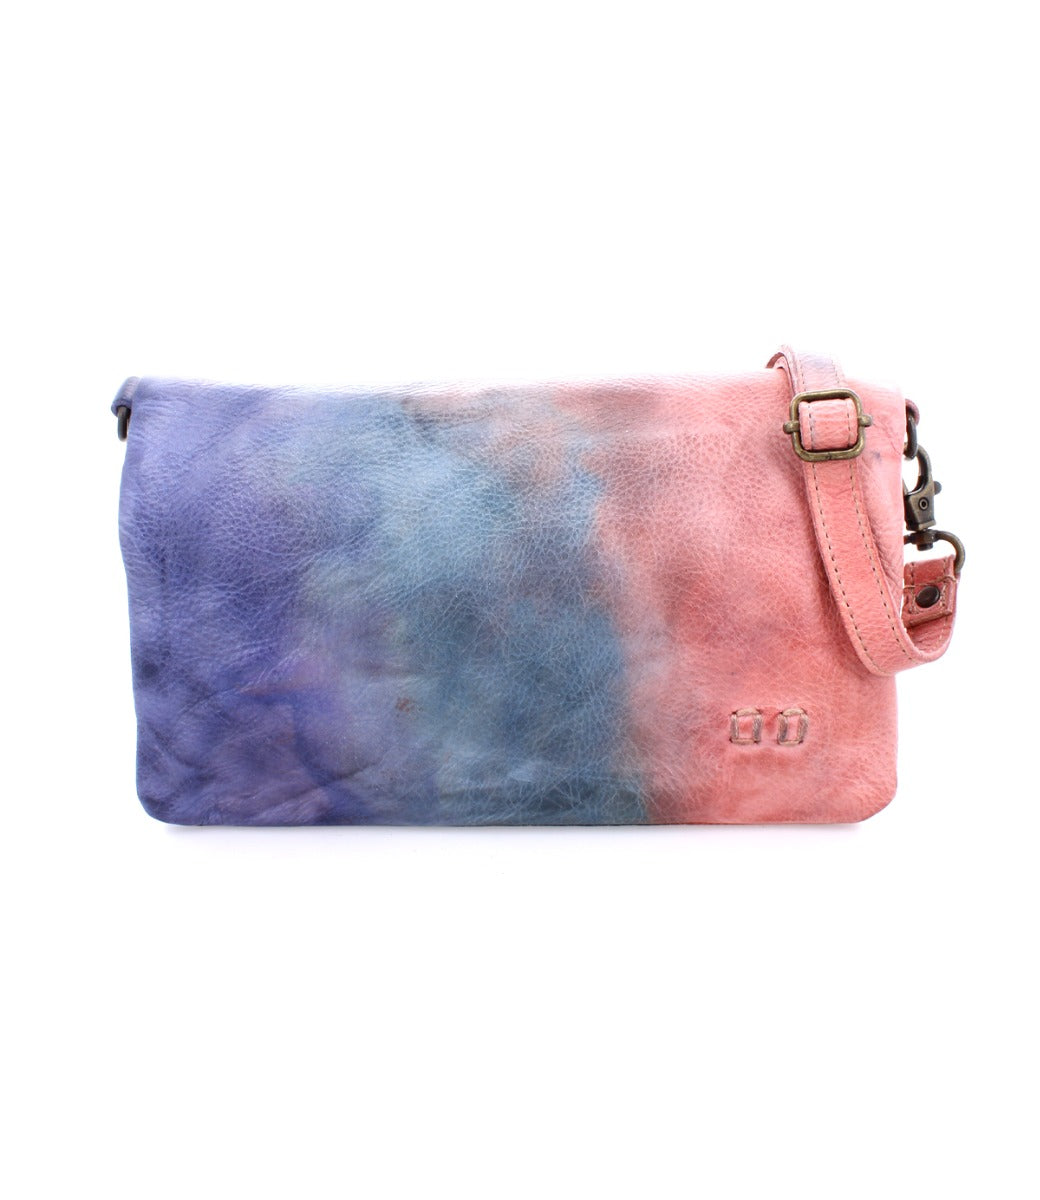 A Cadence multi-colored leather clutch bag by Bed Stu.